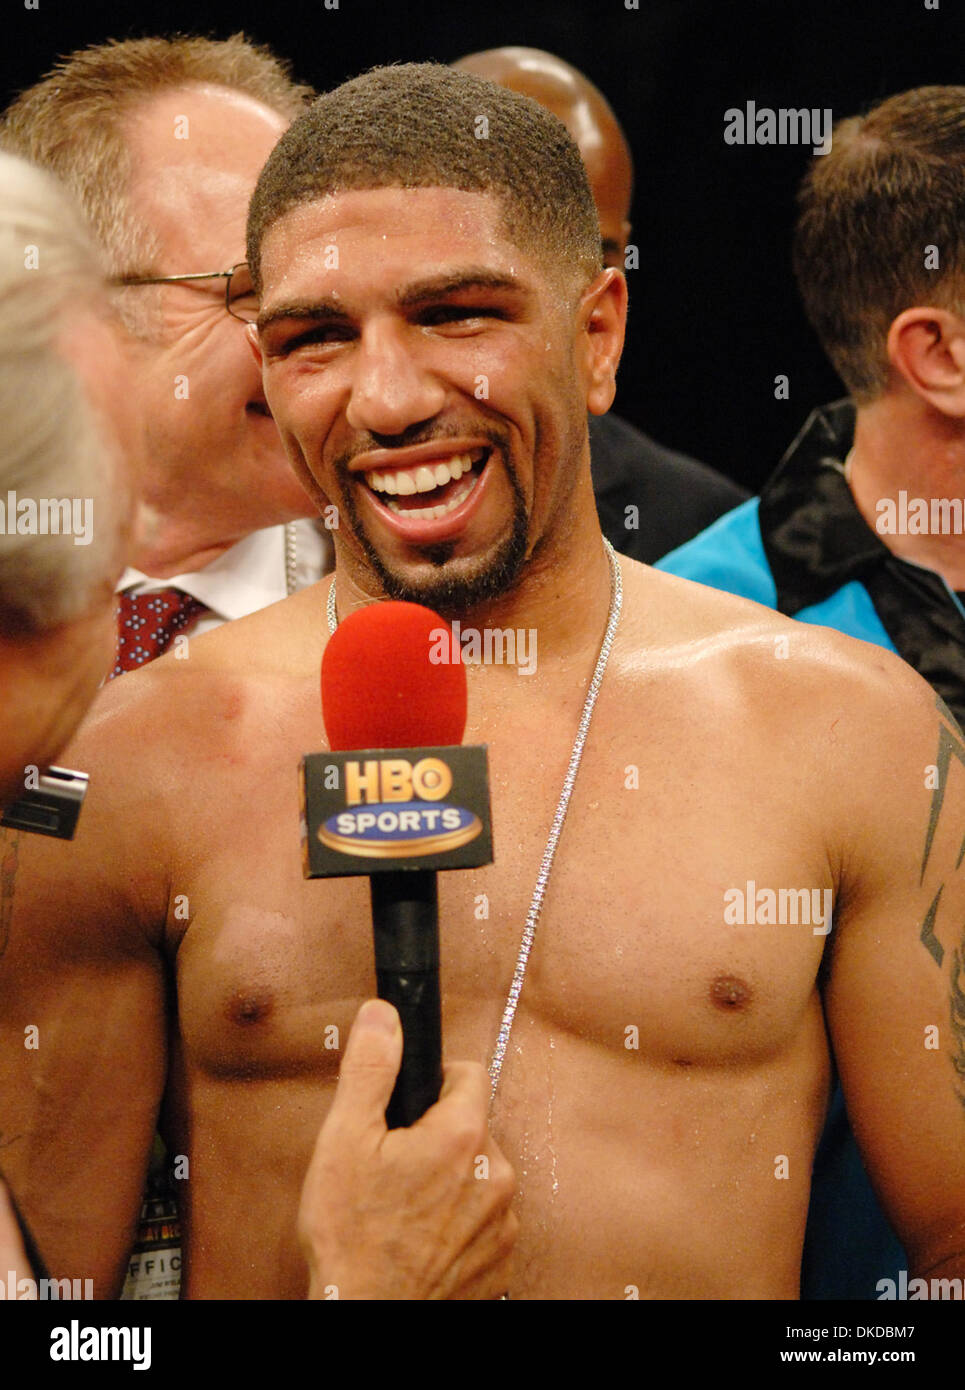 Dec 03, 2006; Tampa, FL, USA; Boxer RONALD 'WINKY' WRIGHT after defeating Ike Quartey by decision in front of a packed house at The St. Pete Times Forum in Tampa, Florida. 12/3/06, Tampa, Florida, Rob DeLorenzo Mandatory Credit: Photo by Rob DeLorenzo/ZUMA Press. (©) Copyright 2006 by Rob DeLorenzo Stock Photo